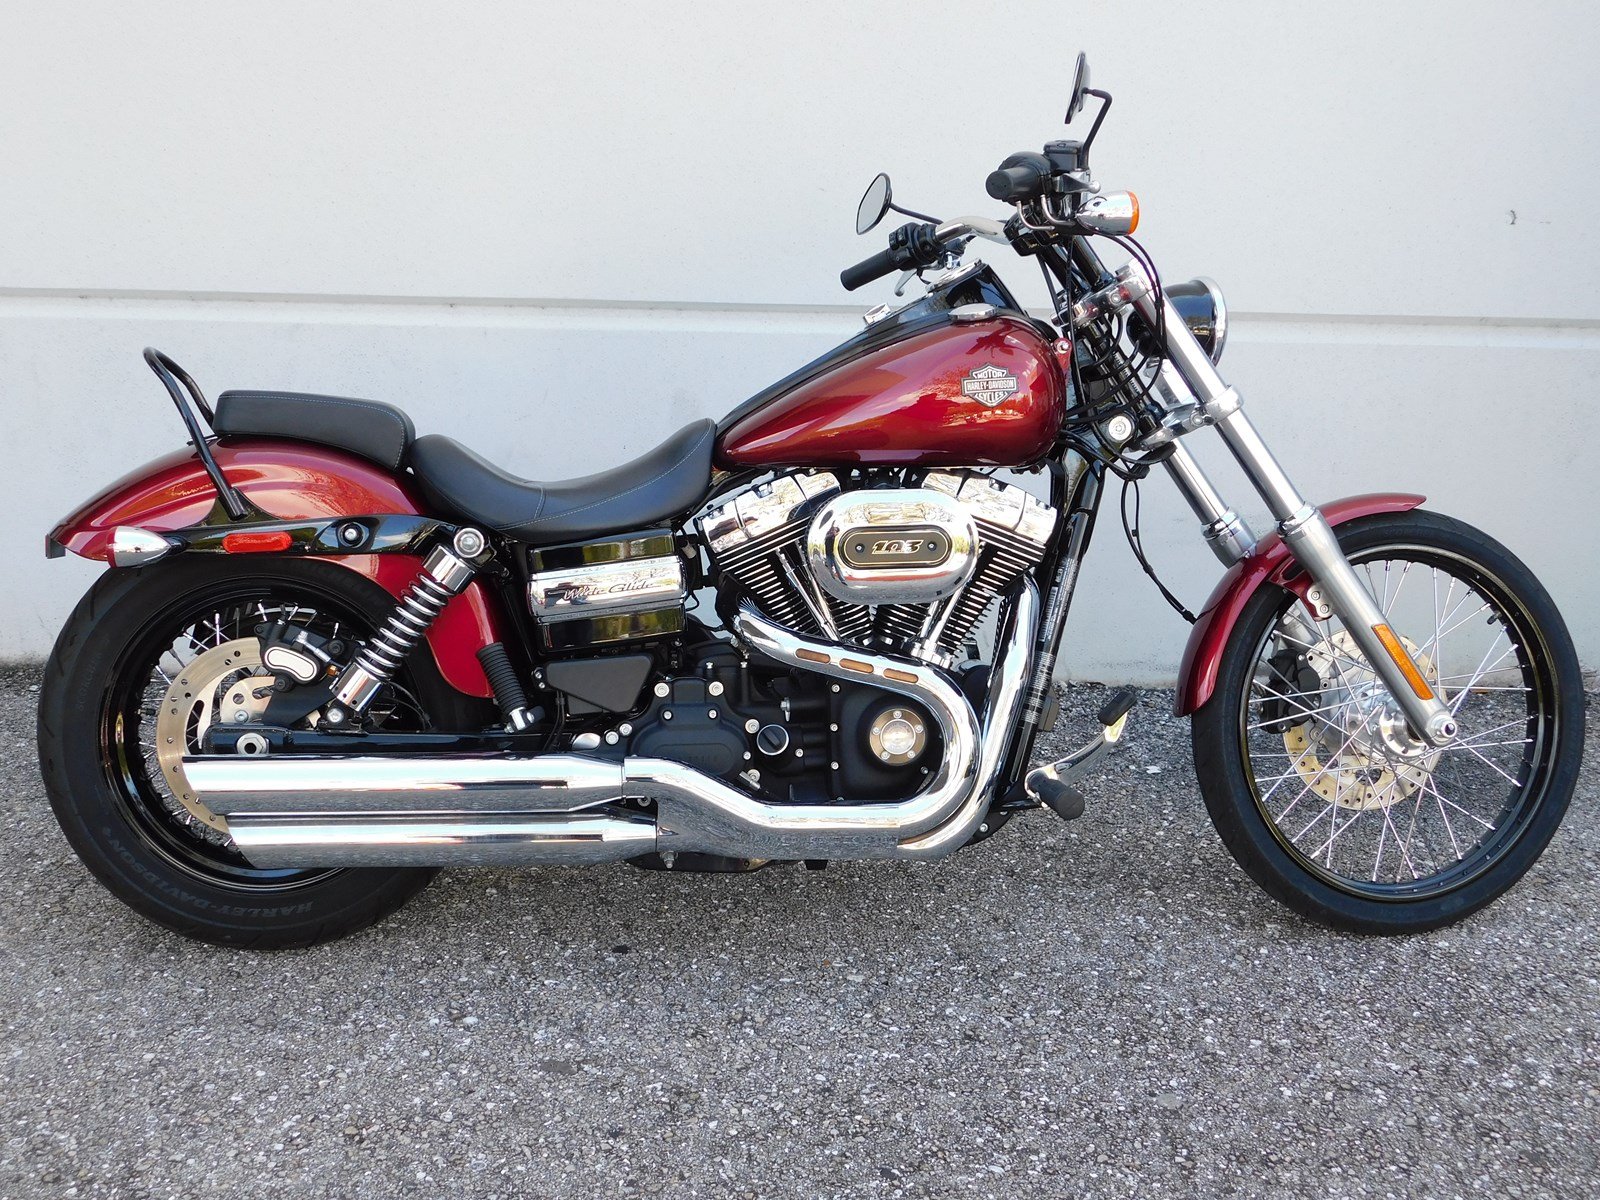 Pre-Owned 2016 Harley-Davidson Dyna Wide Glide FXDWG Dyna in West Palm ...